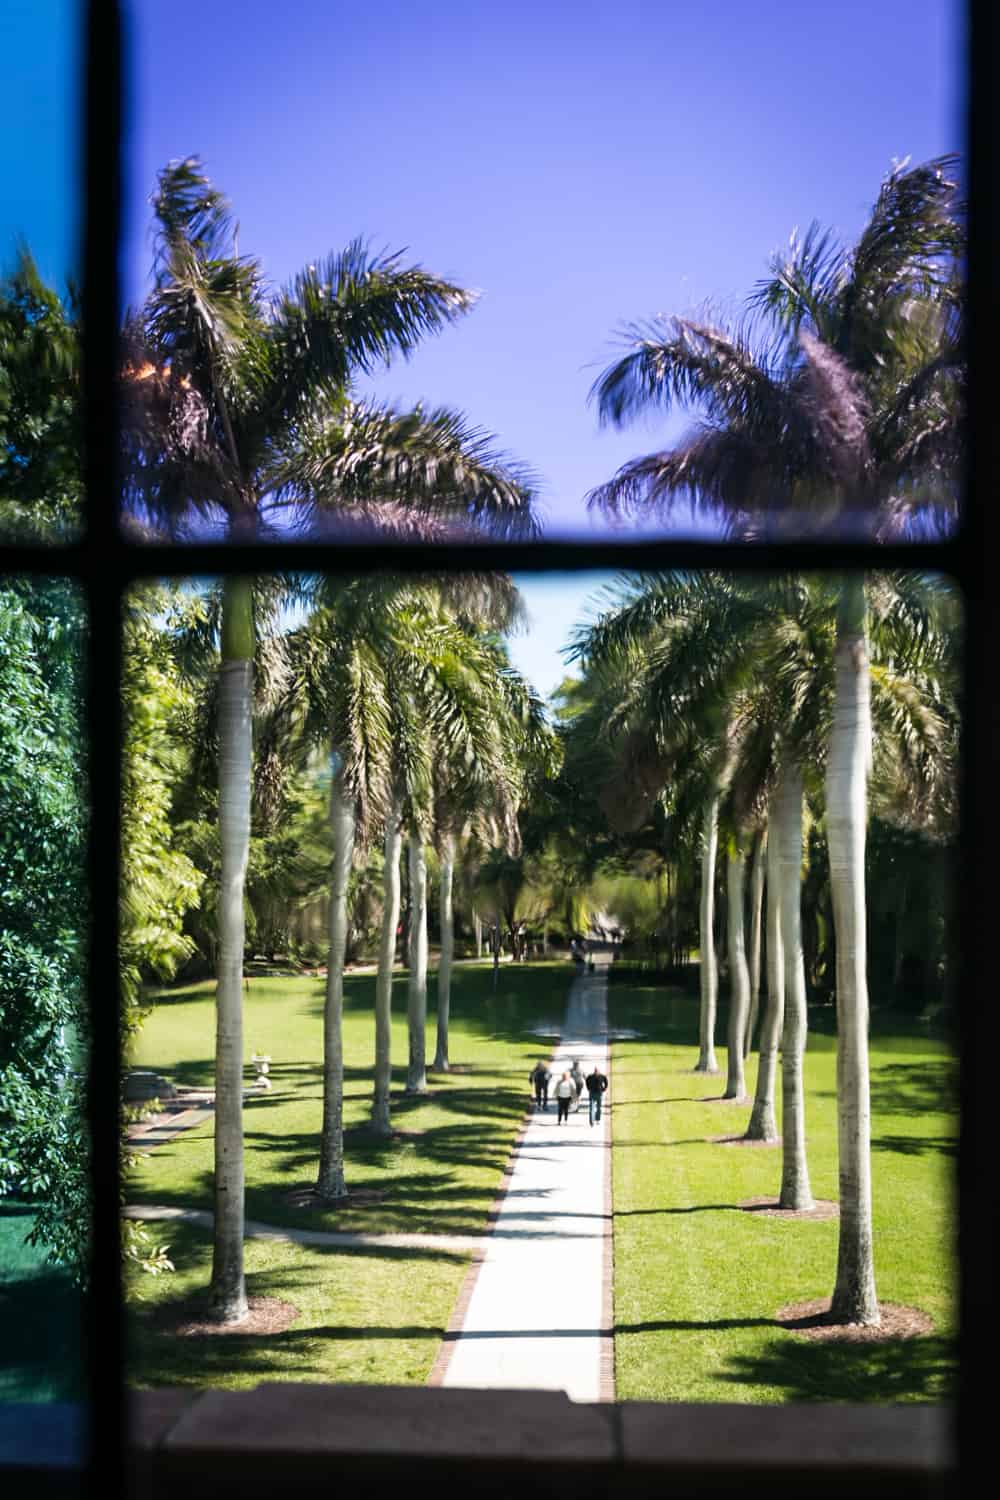 Photos of Sarasota including view of palm-lined pathway in front of Ca d'Zan